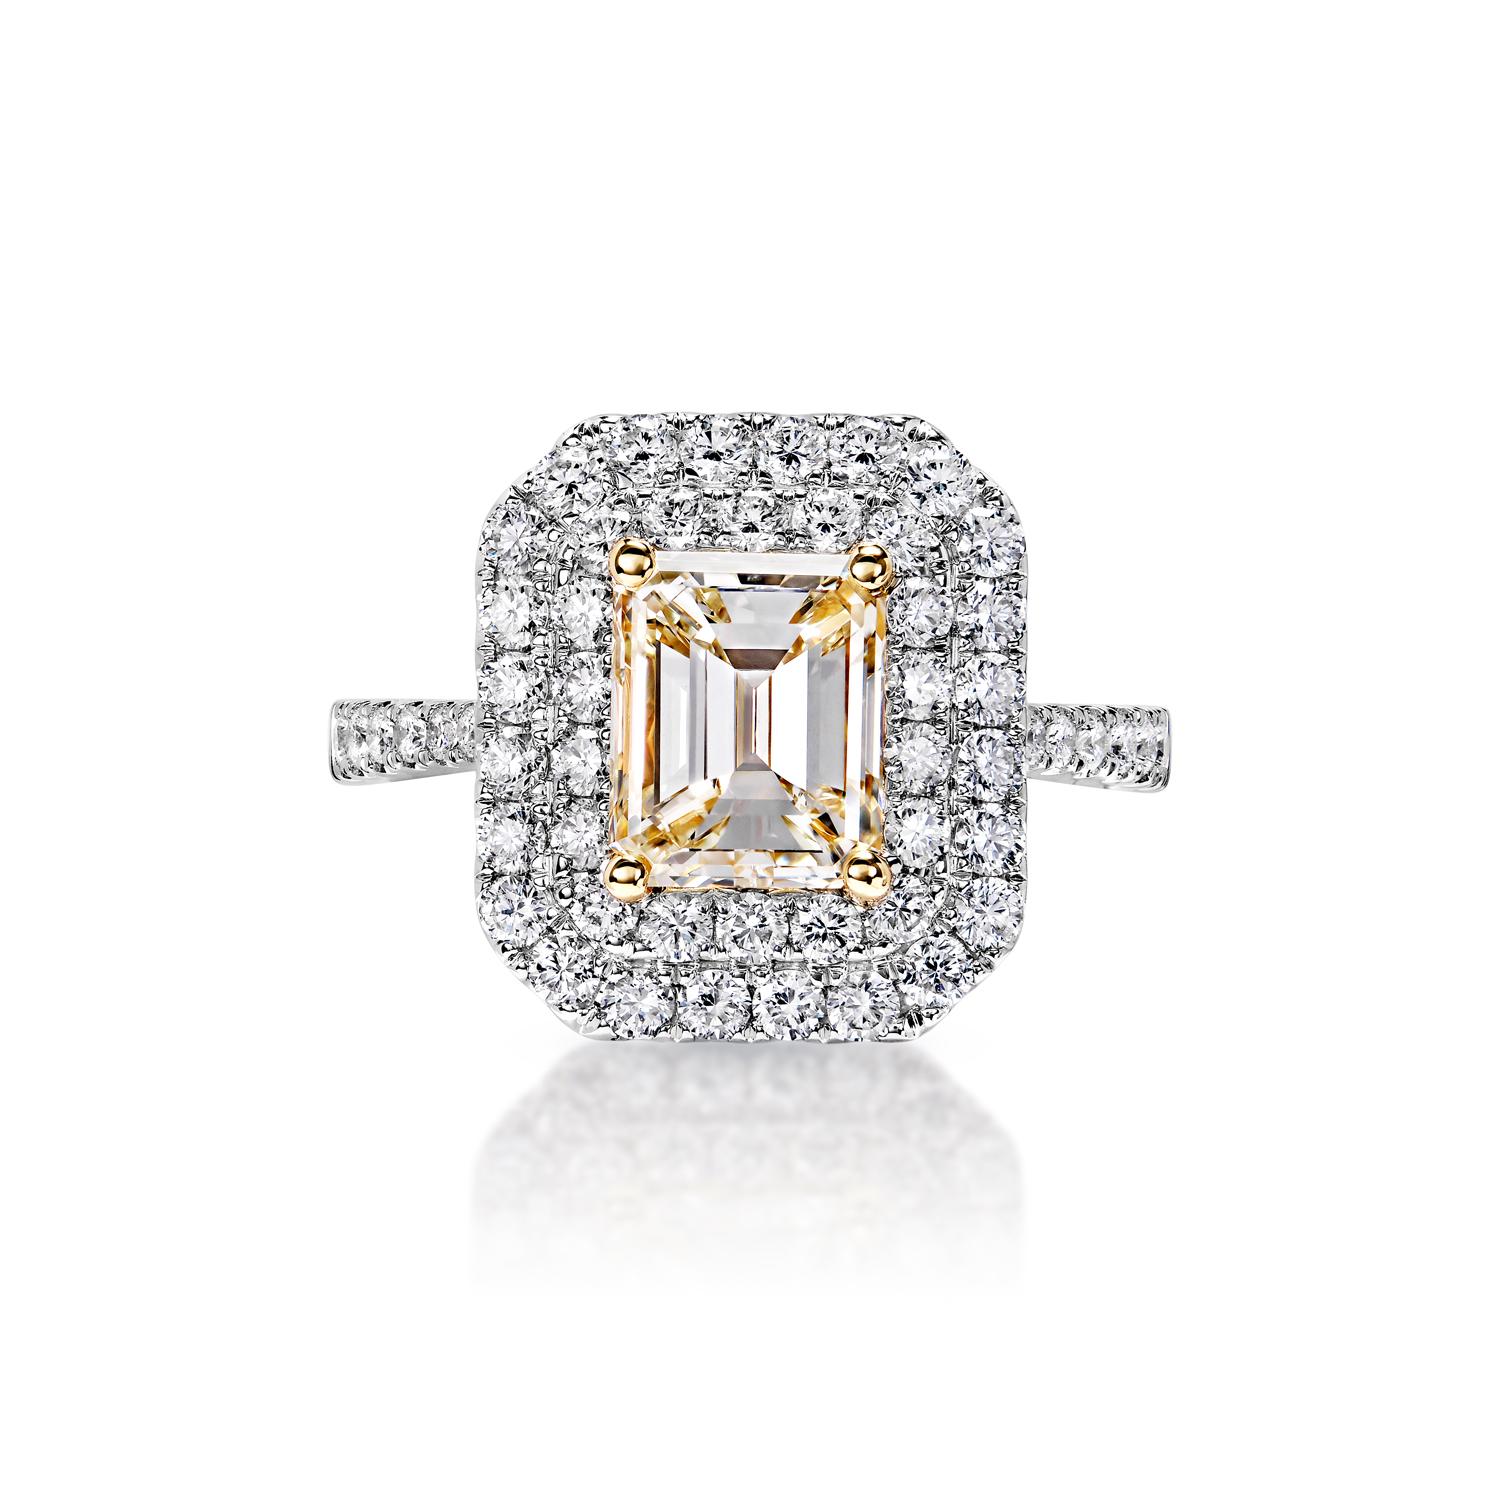 Briella 3 Carat K SI1 Emerald Cut Double Halo Diamond Engagement Ring in 18k White Gold By Mike Nekta.

 

GIA CERTIFIED
Center Diamond:

Carat Weight: 2.00 Carats
Color : K
Clarity: SI1
Style: Emerald Cut

Ring:
Settings: 4 Round Prong, Double